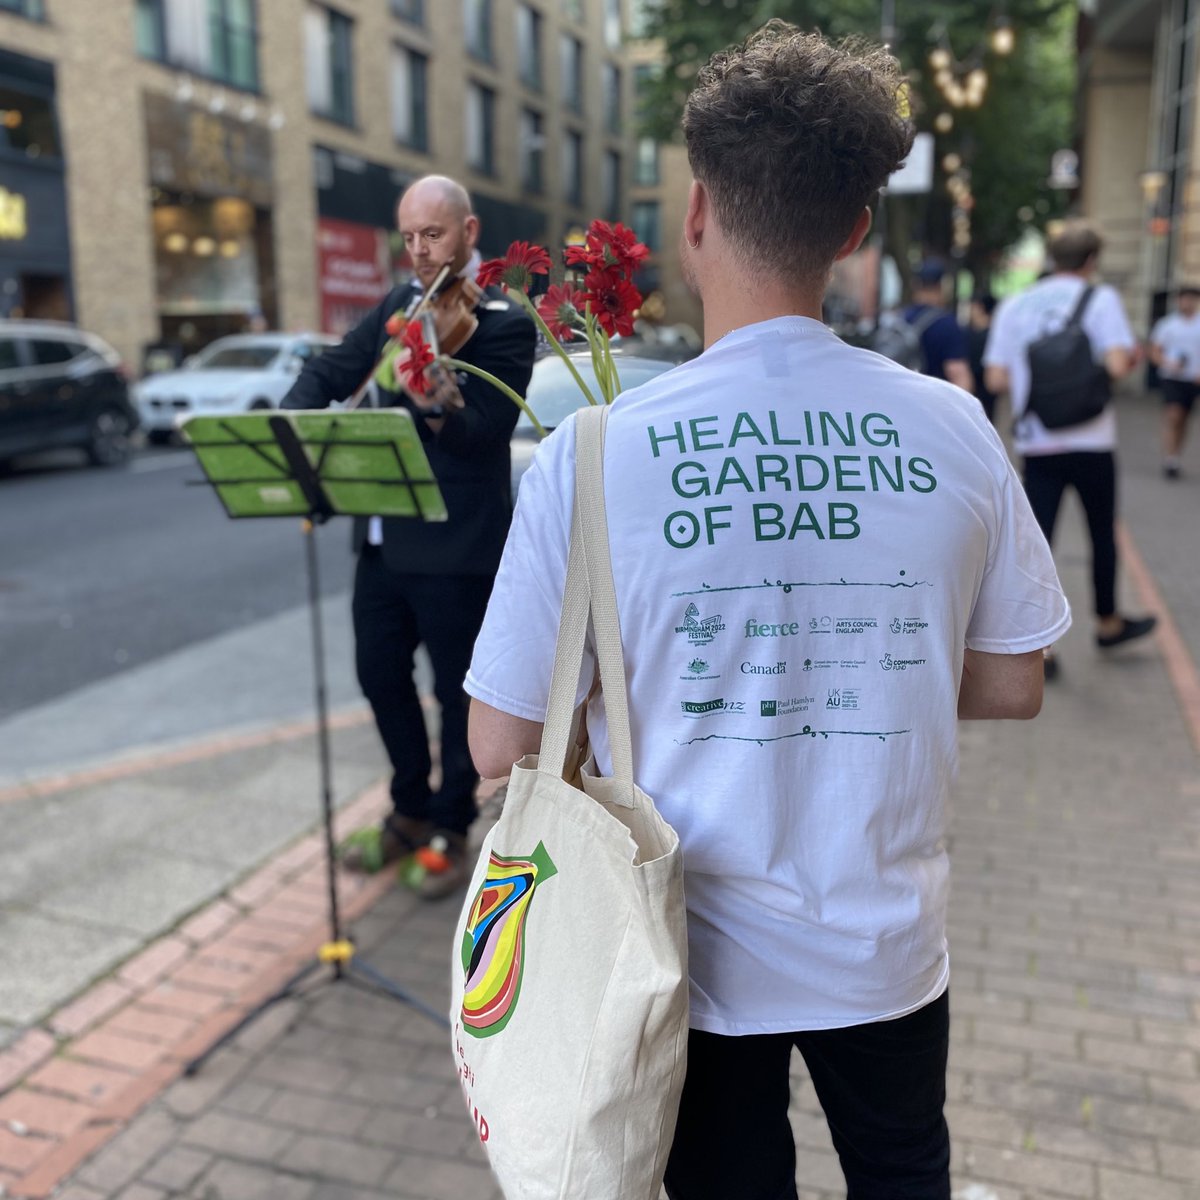 Haven’t shared much of my past 2 weeks of #HealingGardensOfBab joy but flyering on Hurst St with a viola player & fresh flowers is a laugh.. Come to @duckielondon’s 𝗣𝗥𝗜𝗡𝗖𝗘𝗦𝗦 𝗣𝗜𝗖𝗡𝗜𝗖 𝗣𝗥𝗢𝗠𝗘𝗡𝗔𝗗𝗘 next week! It’ll be a riot